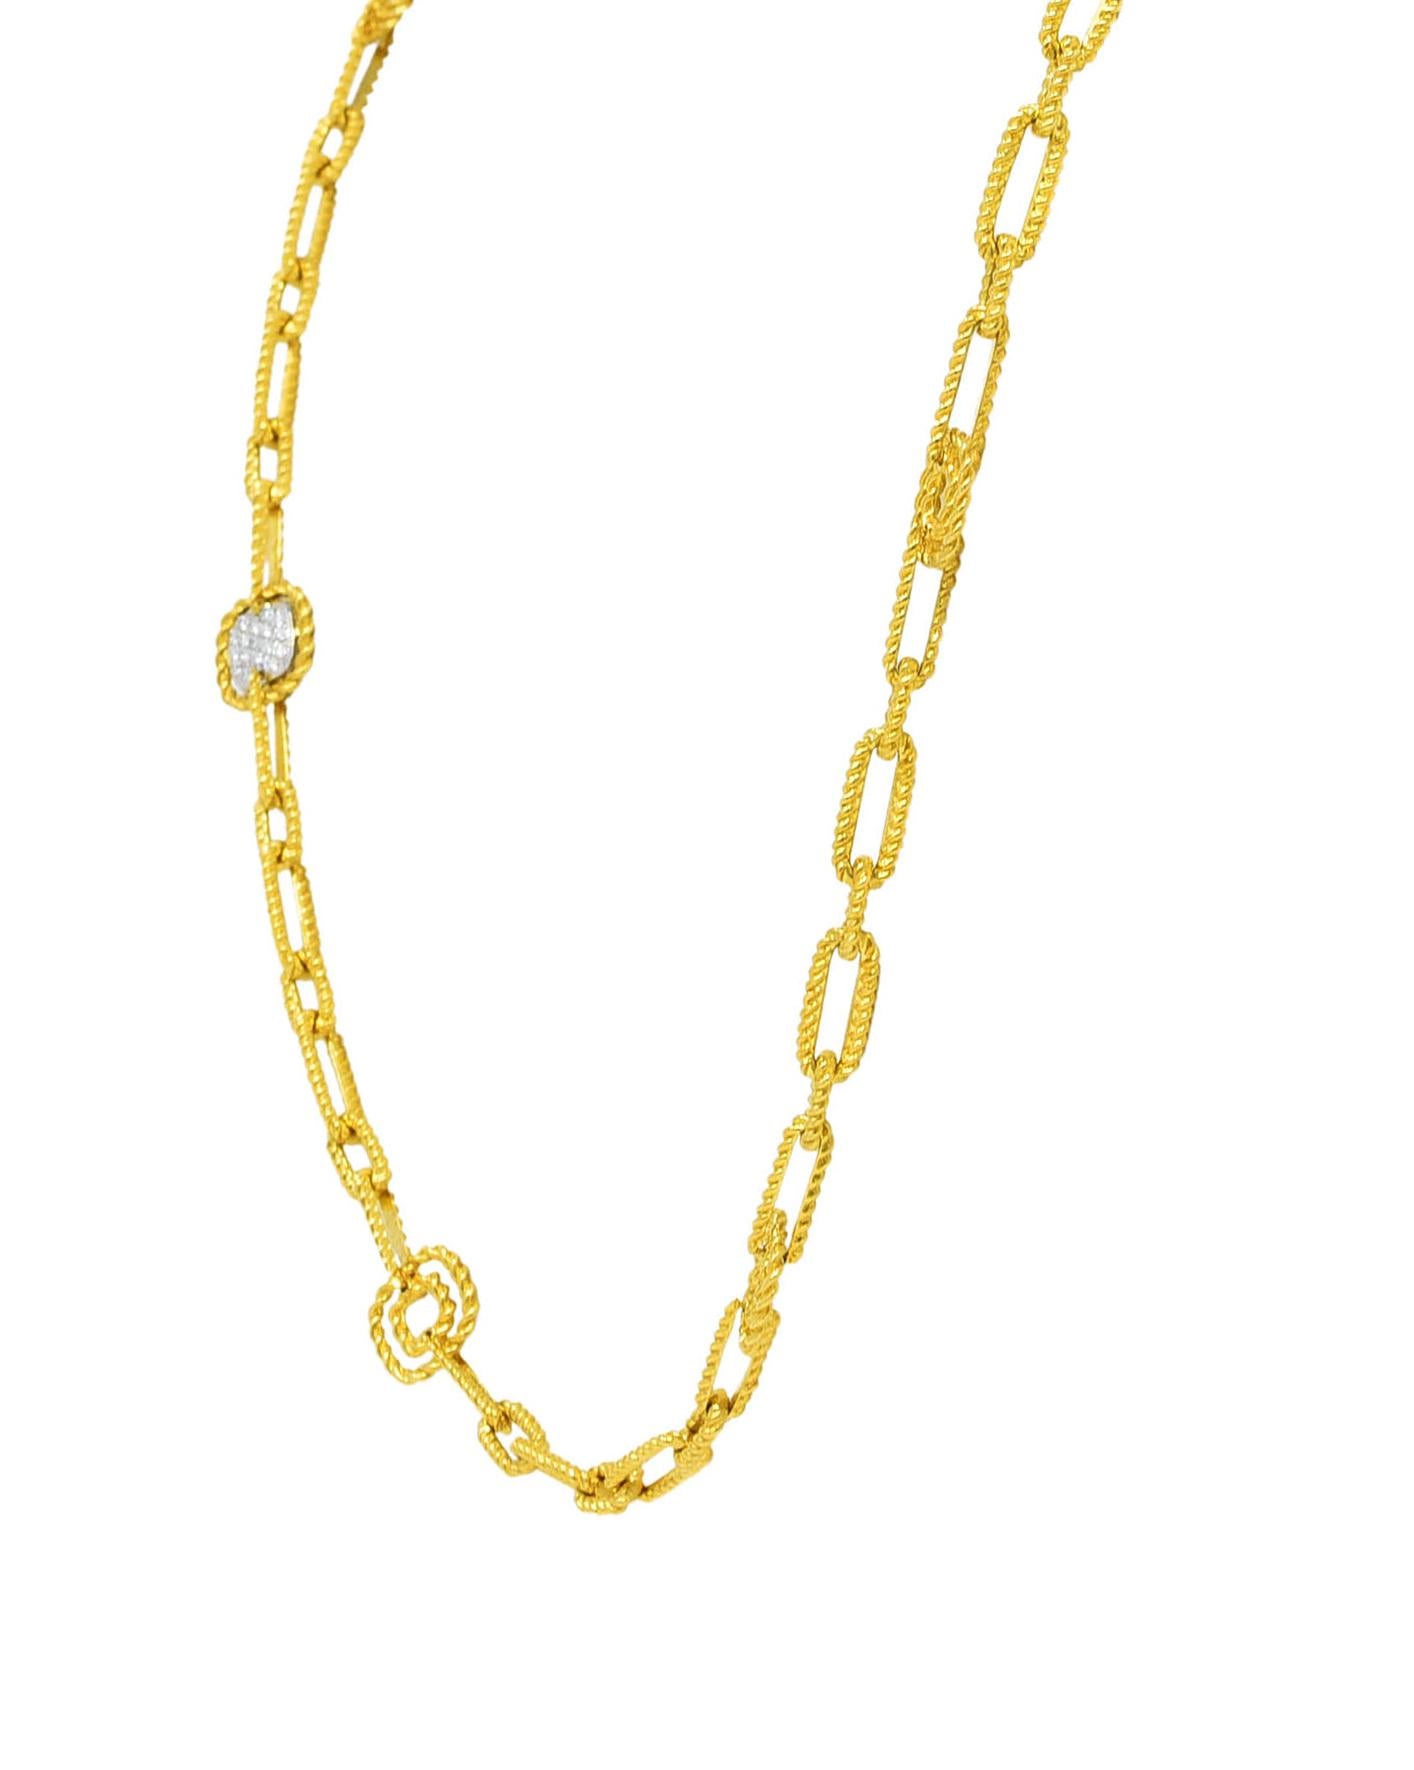 Roberto Coin Vintage Diamond Two-Tone 18 Karat Gold Twisted Rope Chain Necklace 2